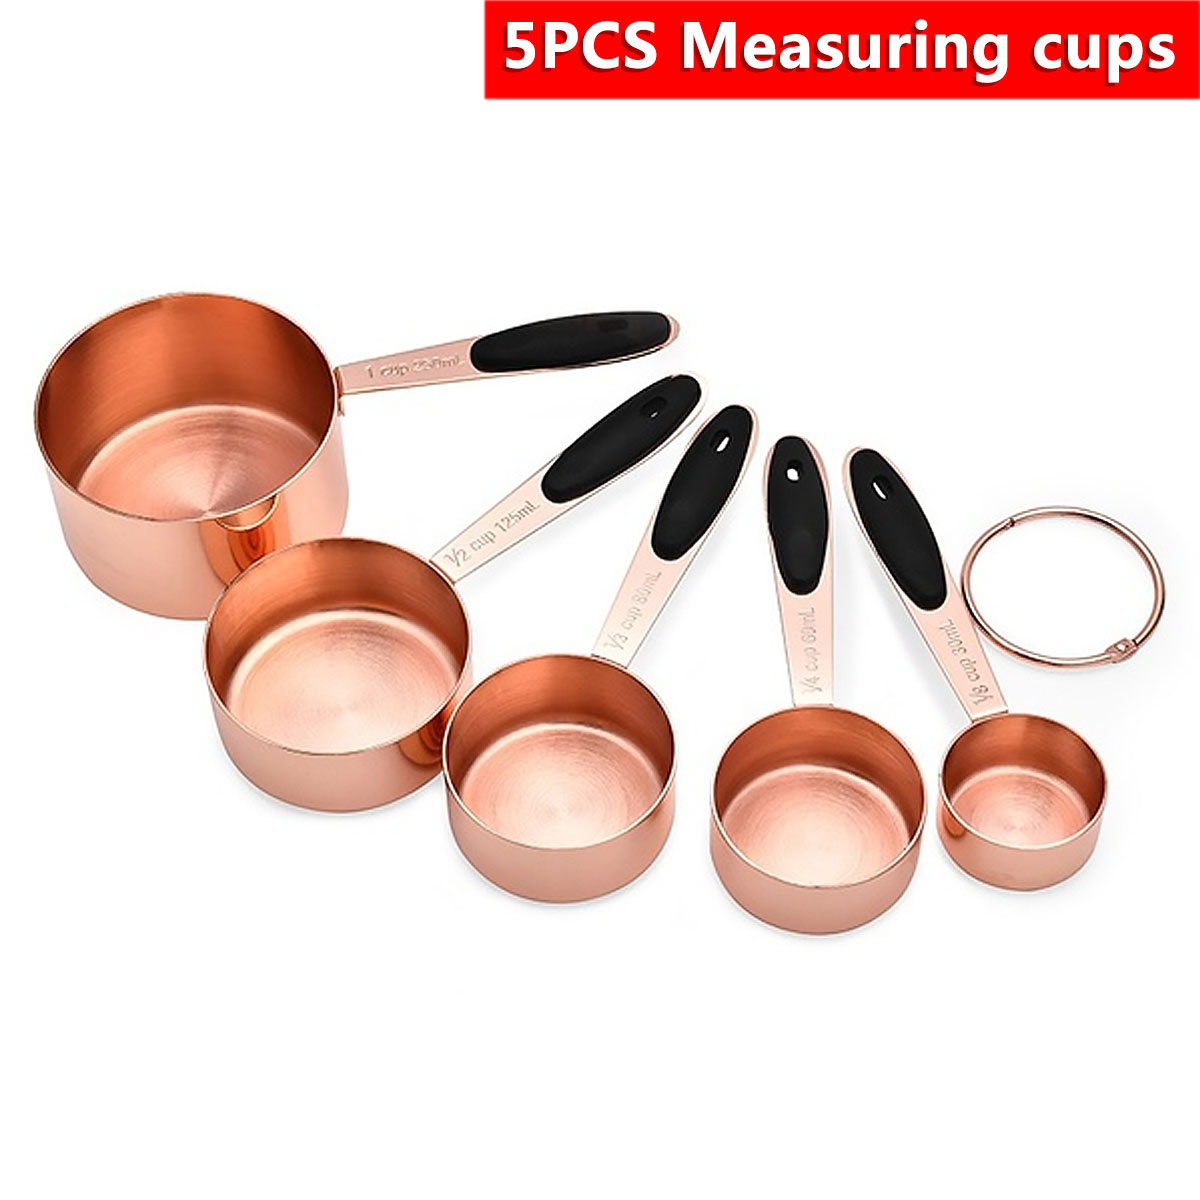 5Pcs-Measuring-Cup-Set-Stainless-Steel-Kitchen-Accessories-Baking-Bartending-Tools-1722150